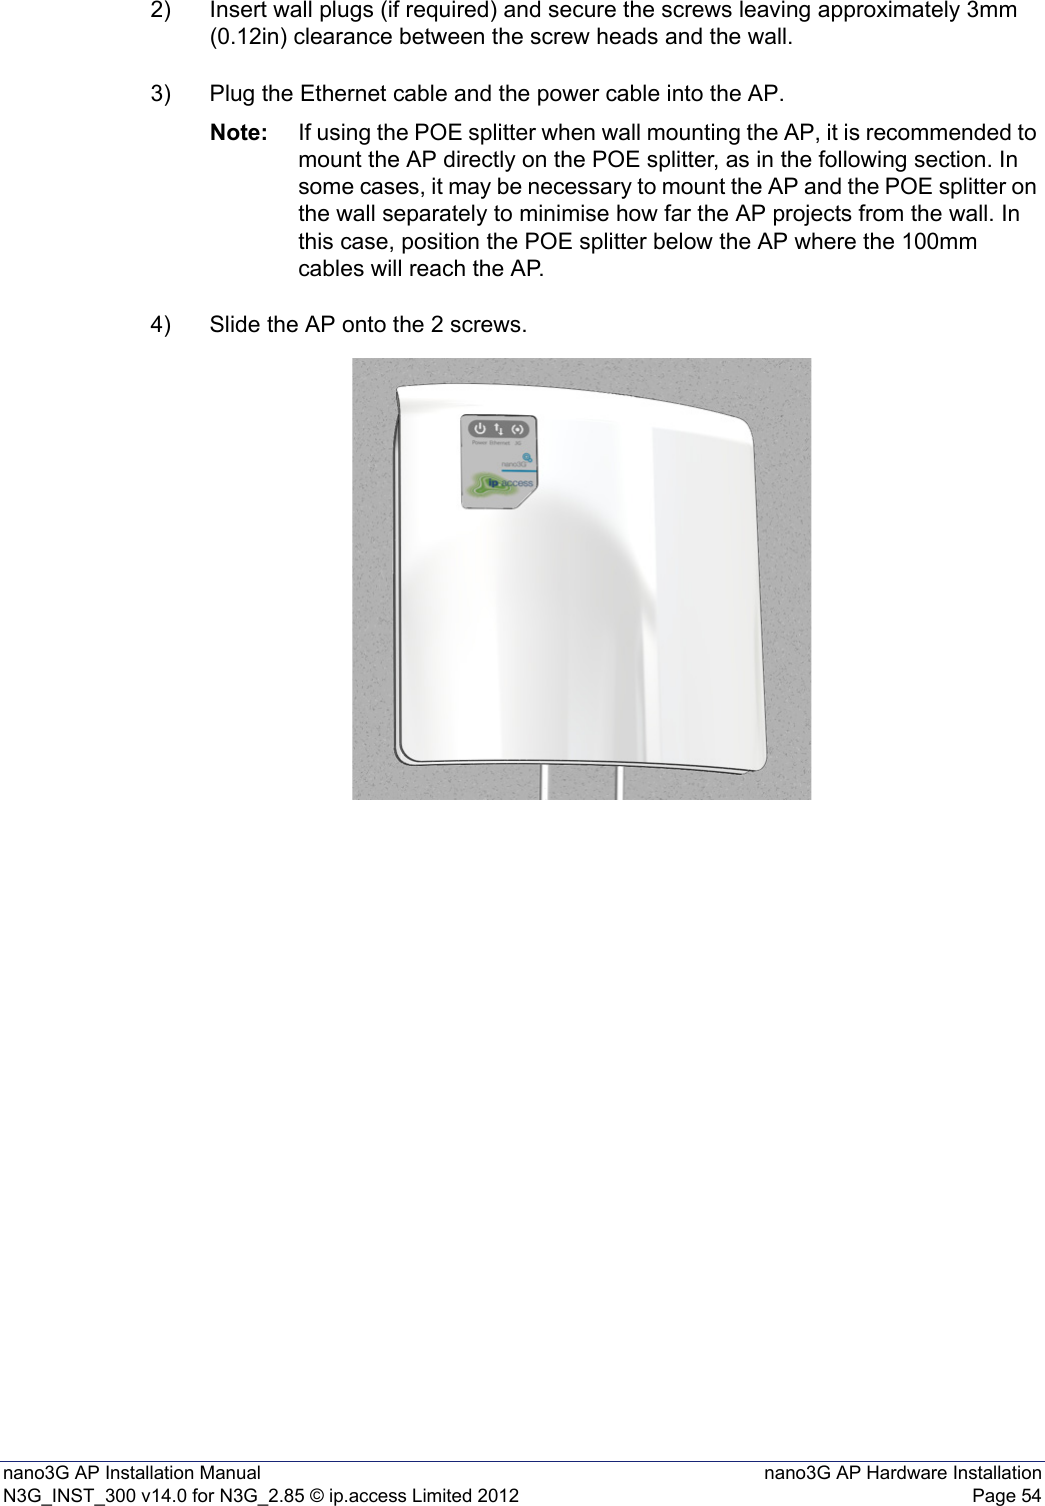 nano3G AP Installation Manual nano3G AP Hardware InstallationN3G_INST_300 v14.0 for N3G_2.85 © ip.access Limited 2012 Page 542) Insert wall plugs (if required) and secure the screws leaving approximately 3mm (0.12in) clearance between the screw heads and the wall.3) Plug the Ethernet cable and the power cable into the AP.Note: If using the POE splitter when wall mounting the AP, it is recommended to mount the AP directly on the POE splitter, as in the following section. In some cases, it may be necessary to mount the AP and the POE splitter on the wall separately to minimise how far the AP projects from the wall. In this case, position the POE splitter below the AP where the 100mm cables will reach the AP. 4) Slide the AP onto the 2 screws.